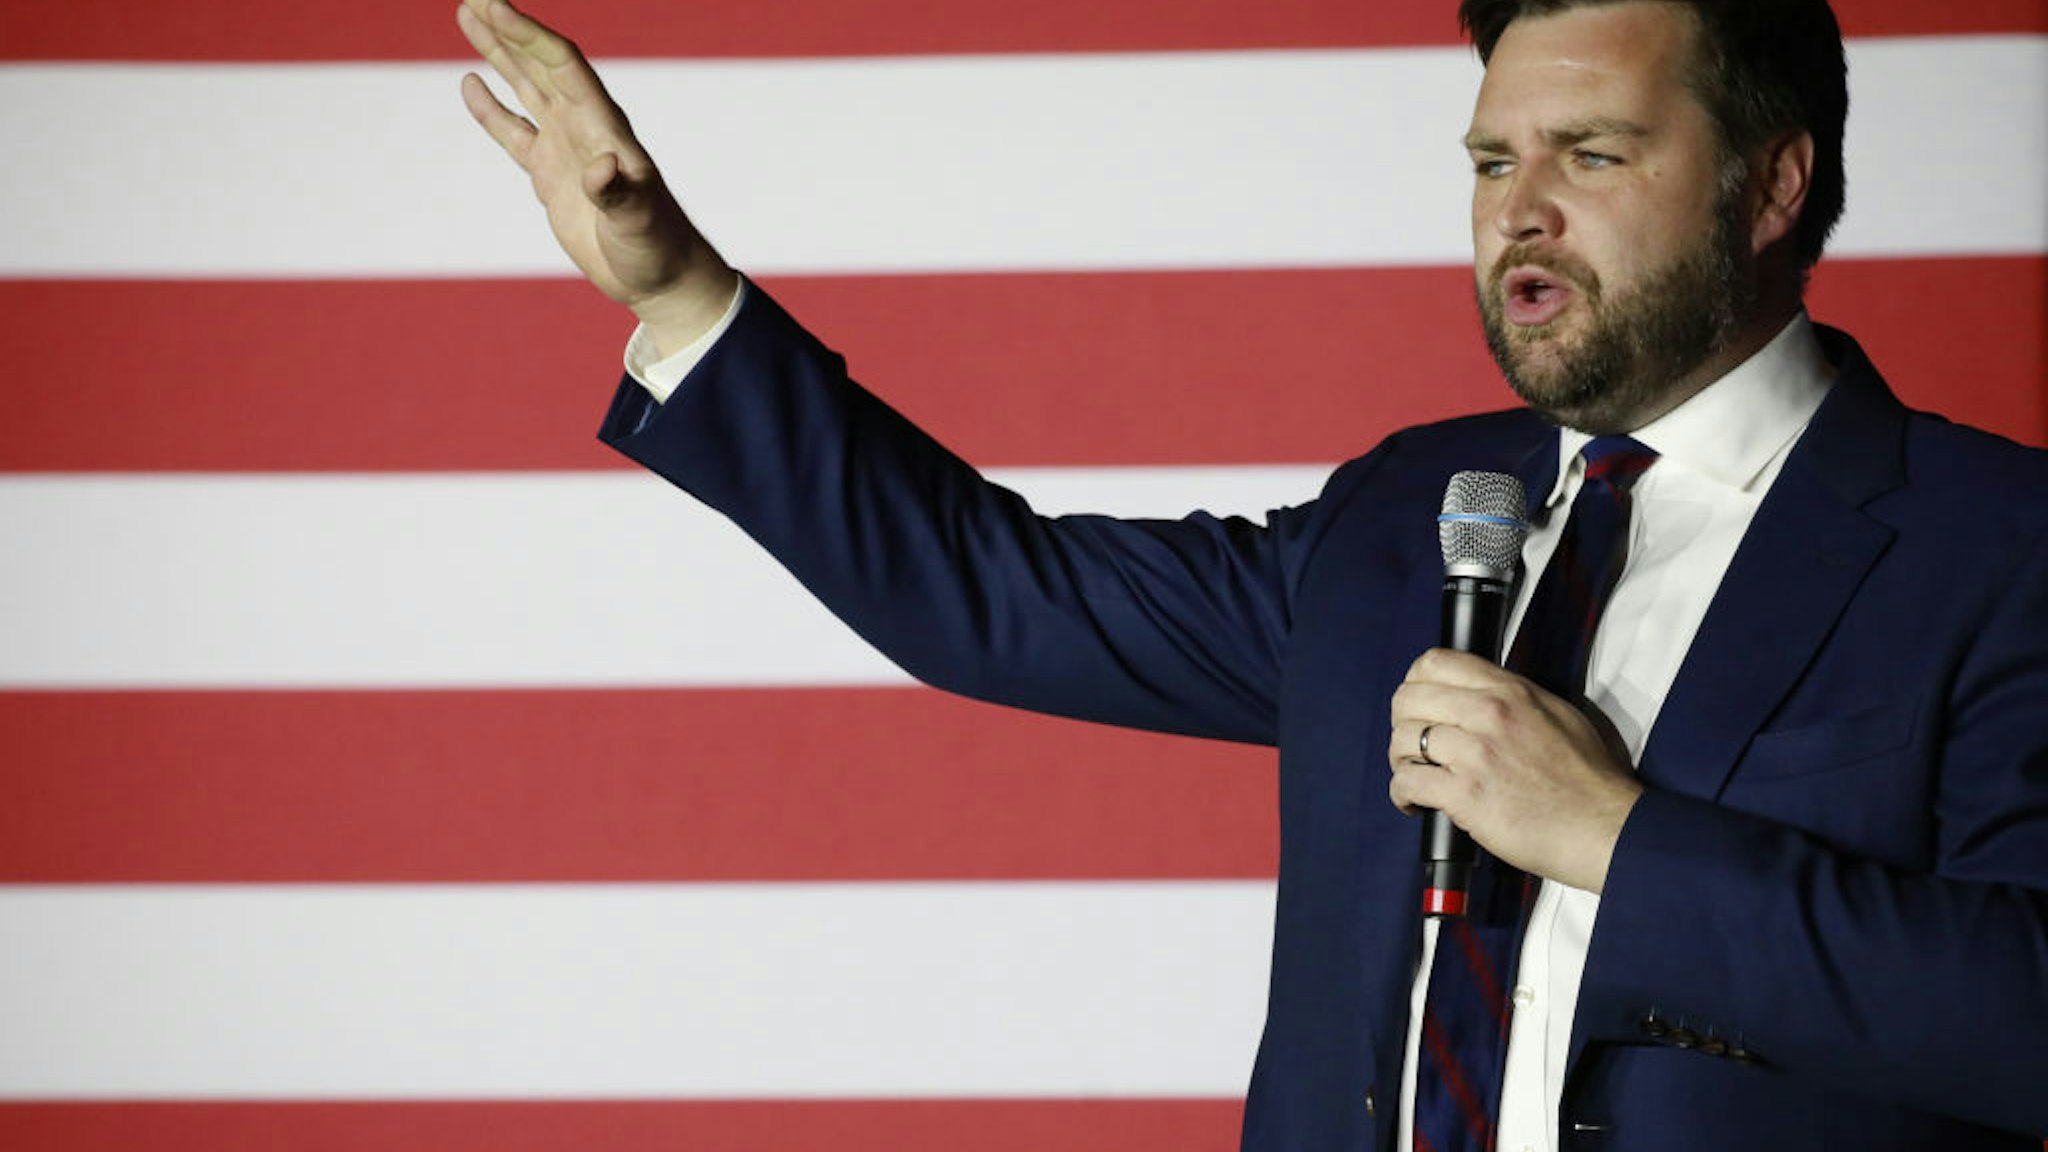 A spokeswoman for Ohio Senate candidate Rep. Tim Ryan said they don't want the Lincoln Projects help in the race against GOP candidate JD Vance.